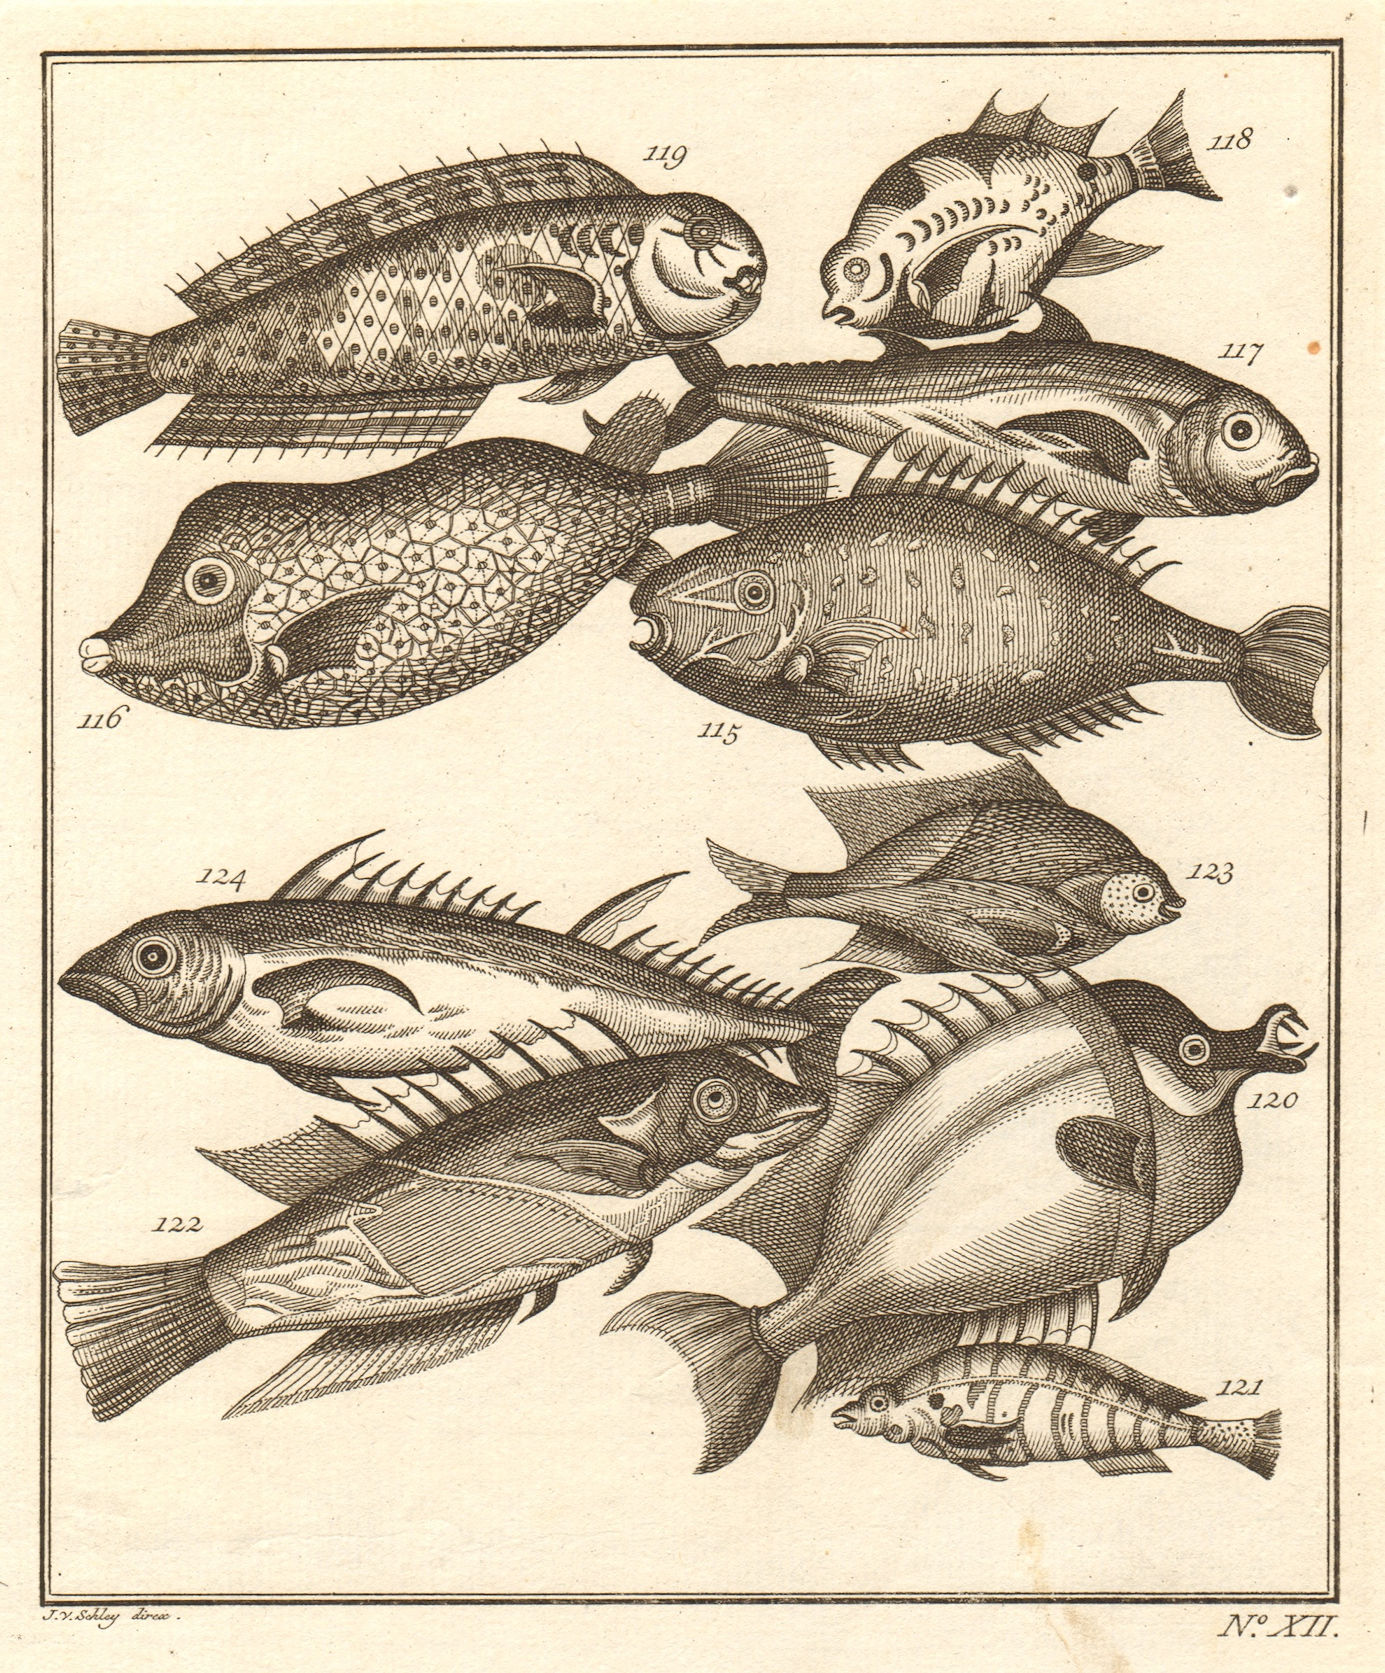 Associate Product XII. Poissons d'Ambione. Indonesia Moluccas Maluku tropical fish. SCHLEY 1763